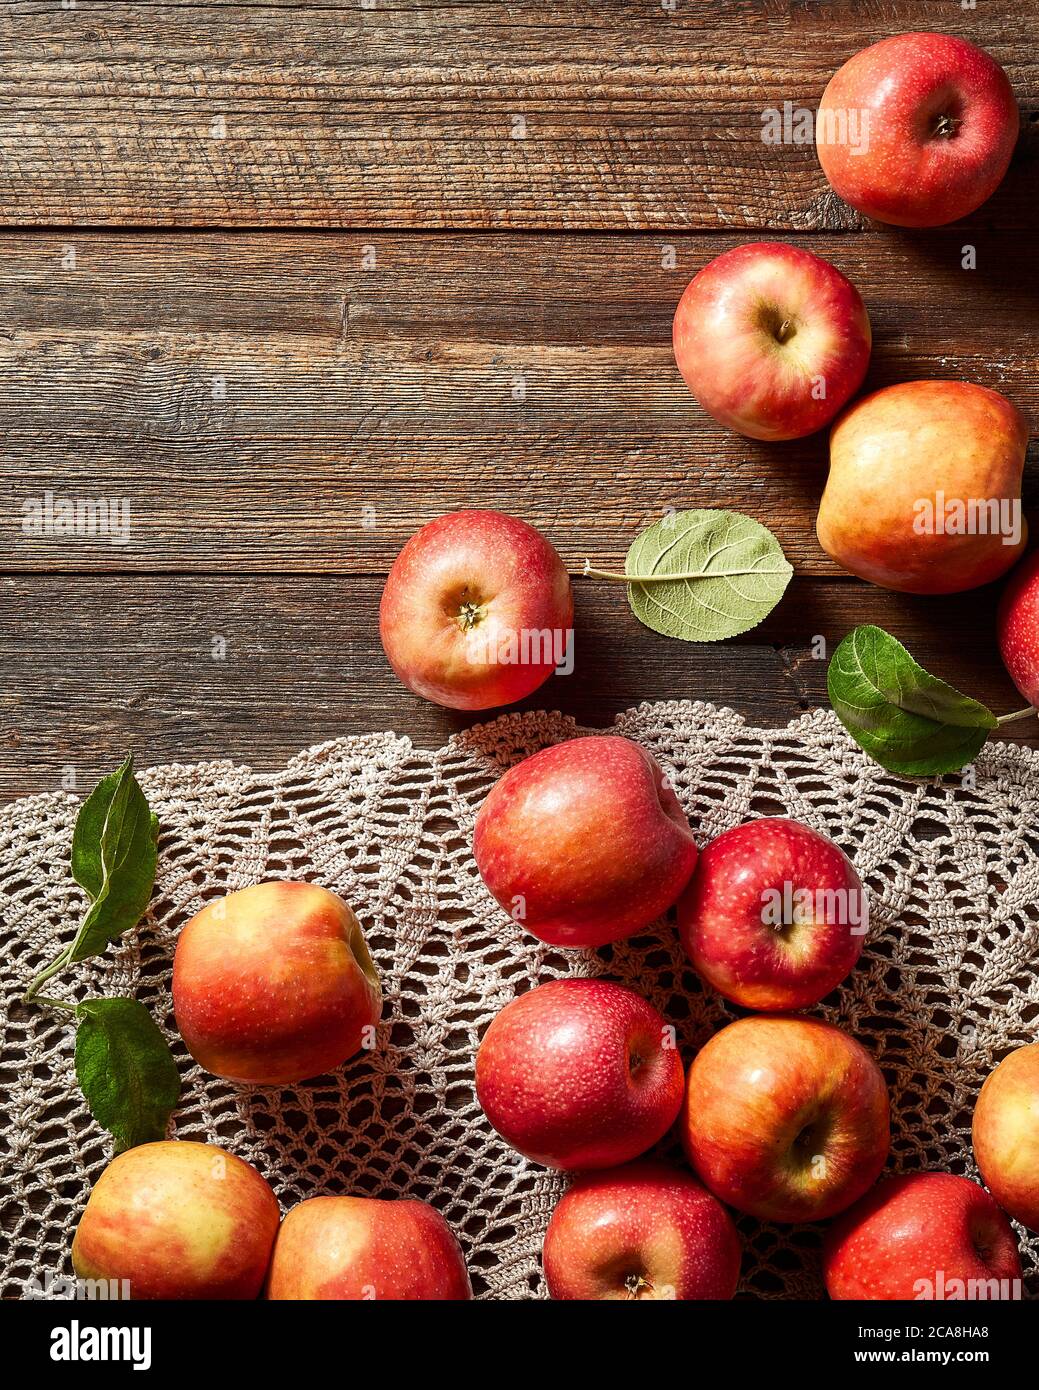 Red apple on rustic wooden table and crochet tablecloth. Summer or autumn season. Stock Photo